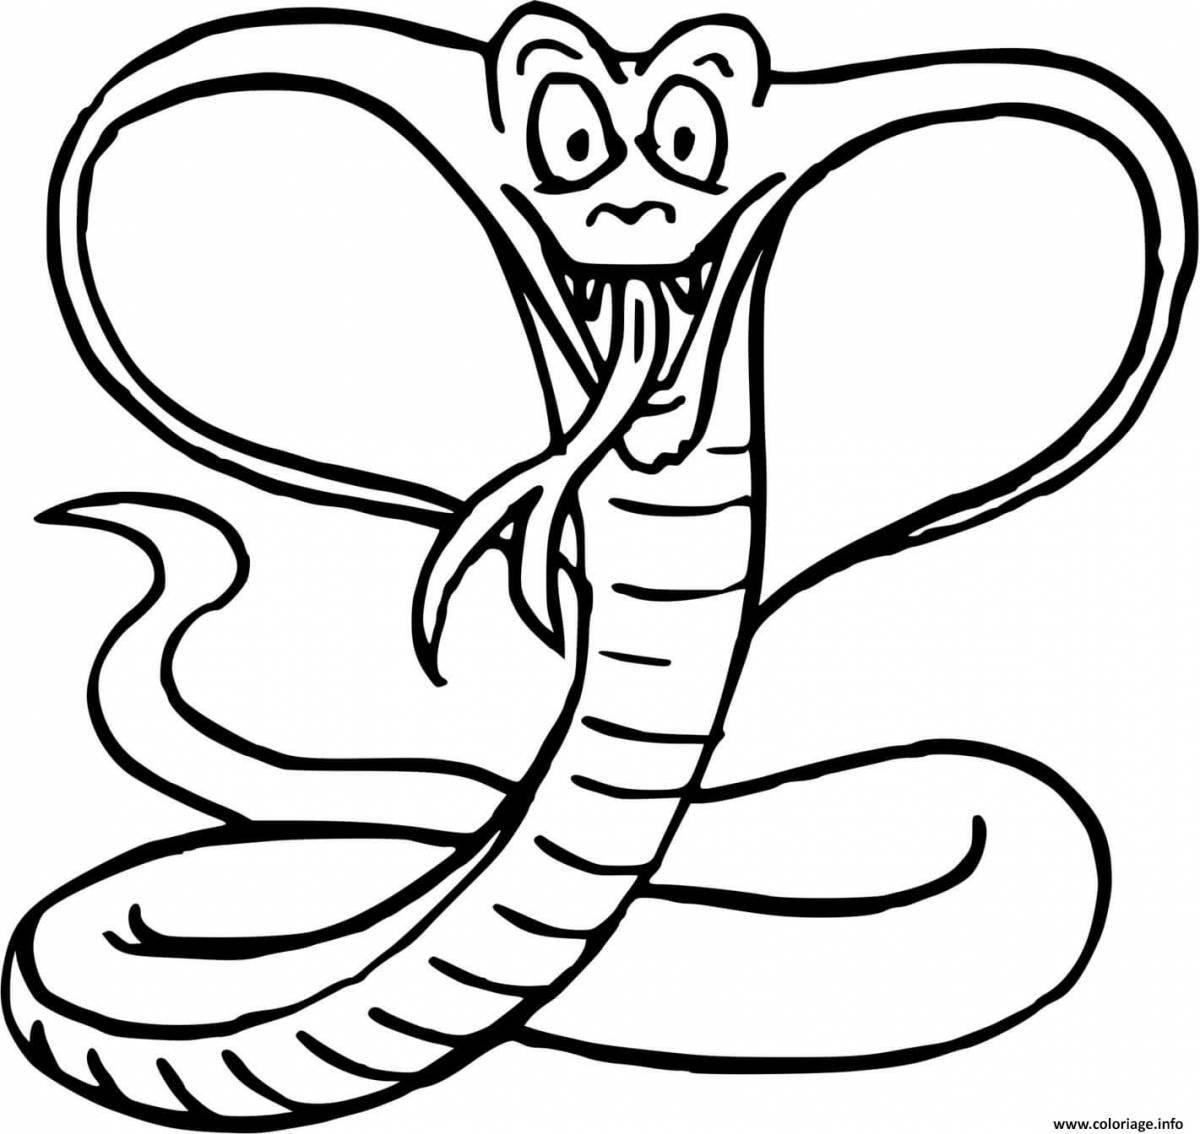 Cobra awesome coloring book